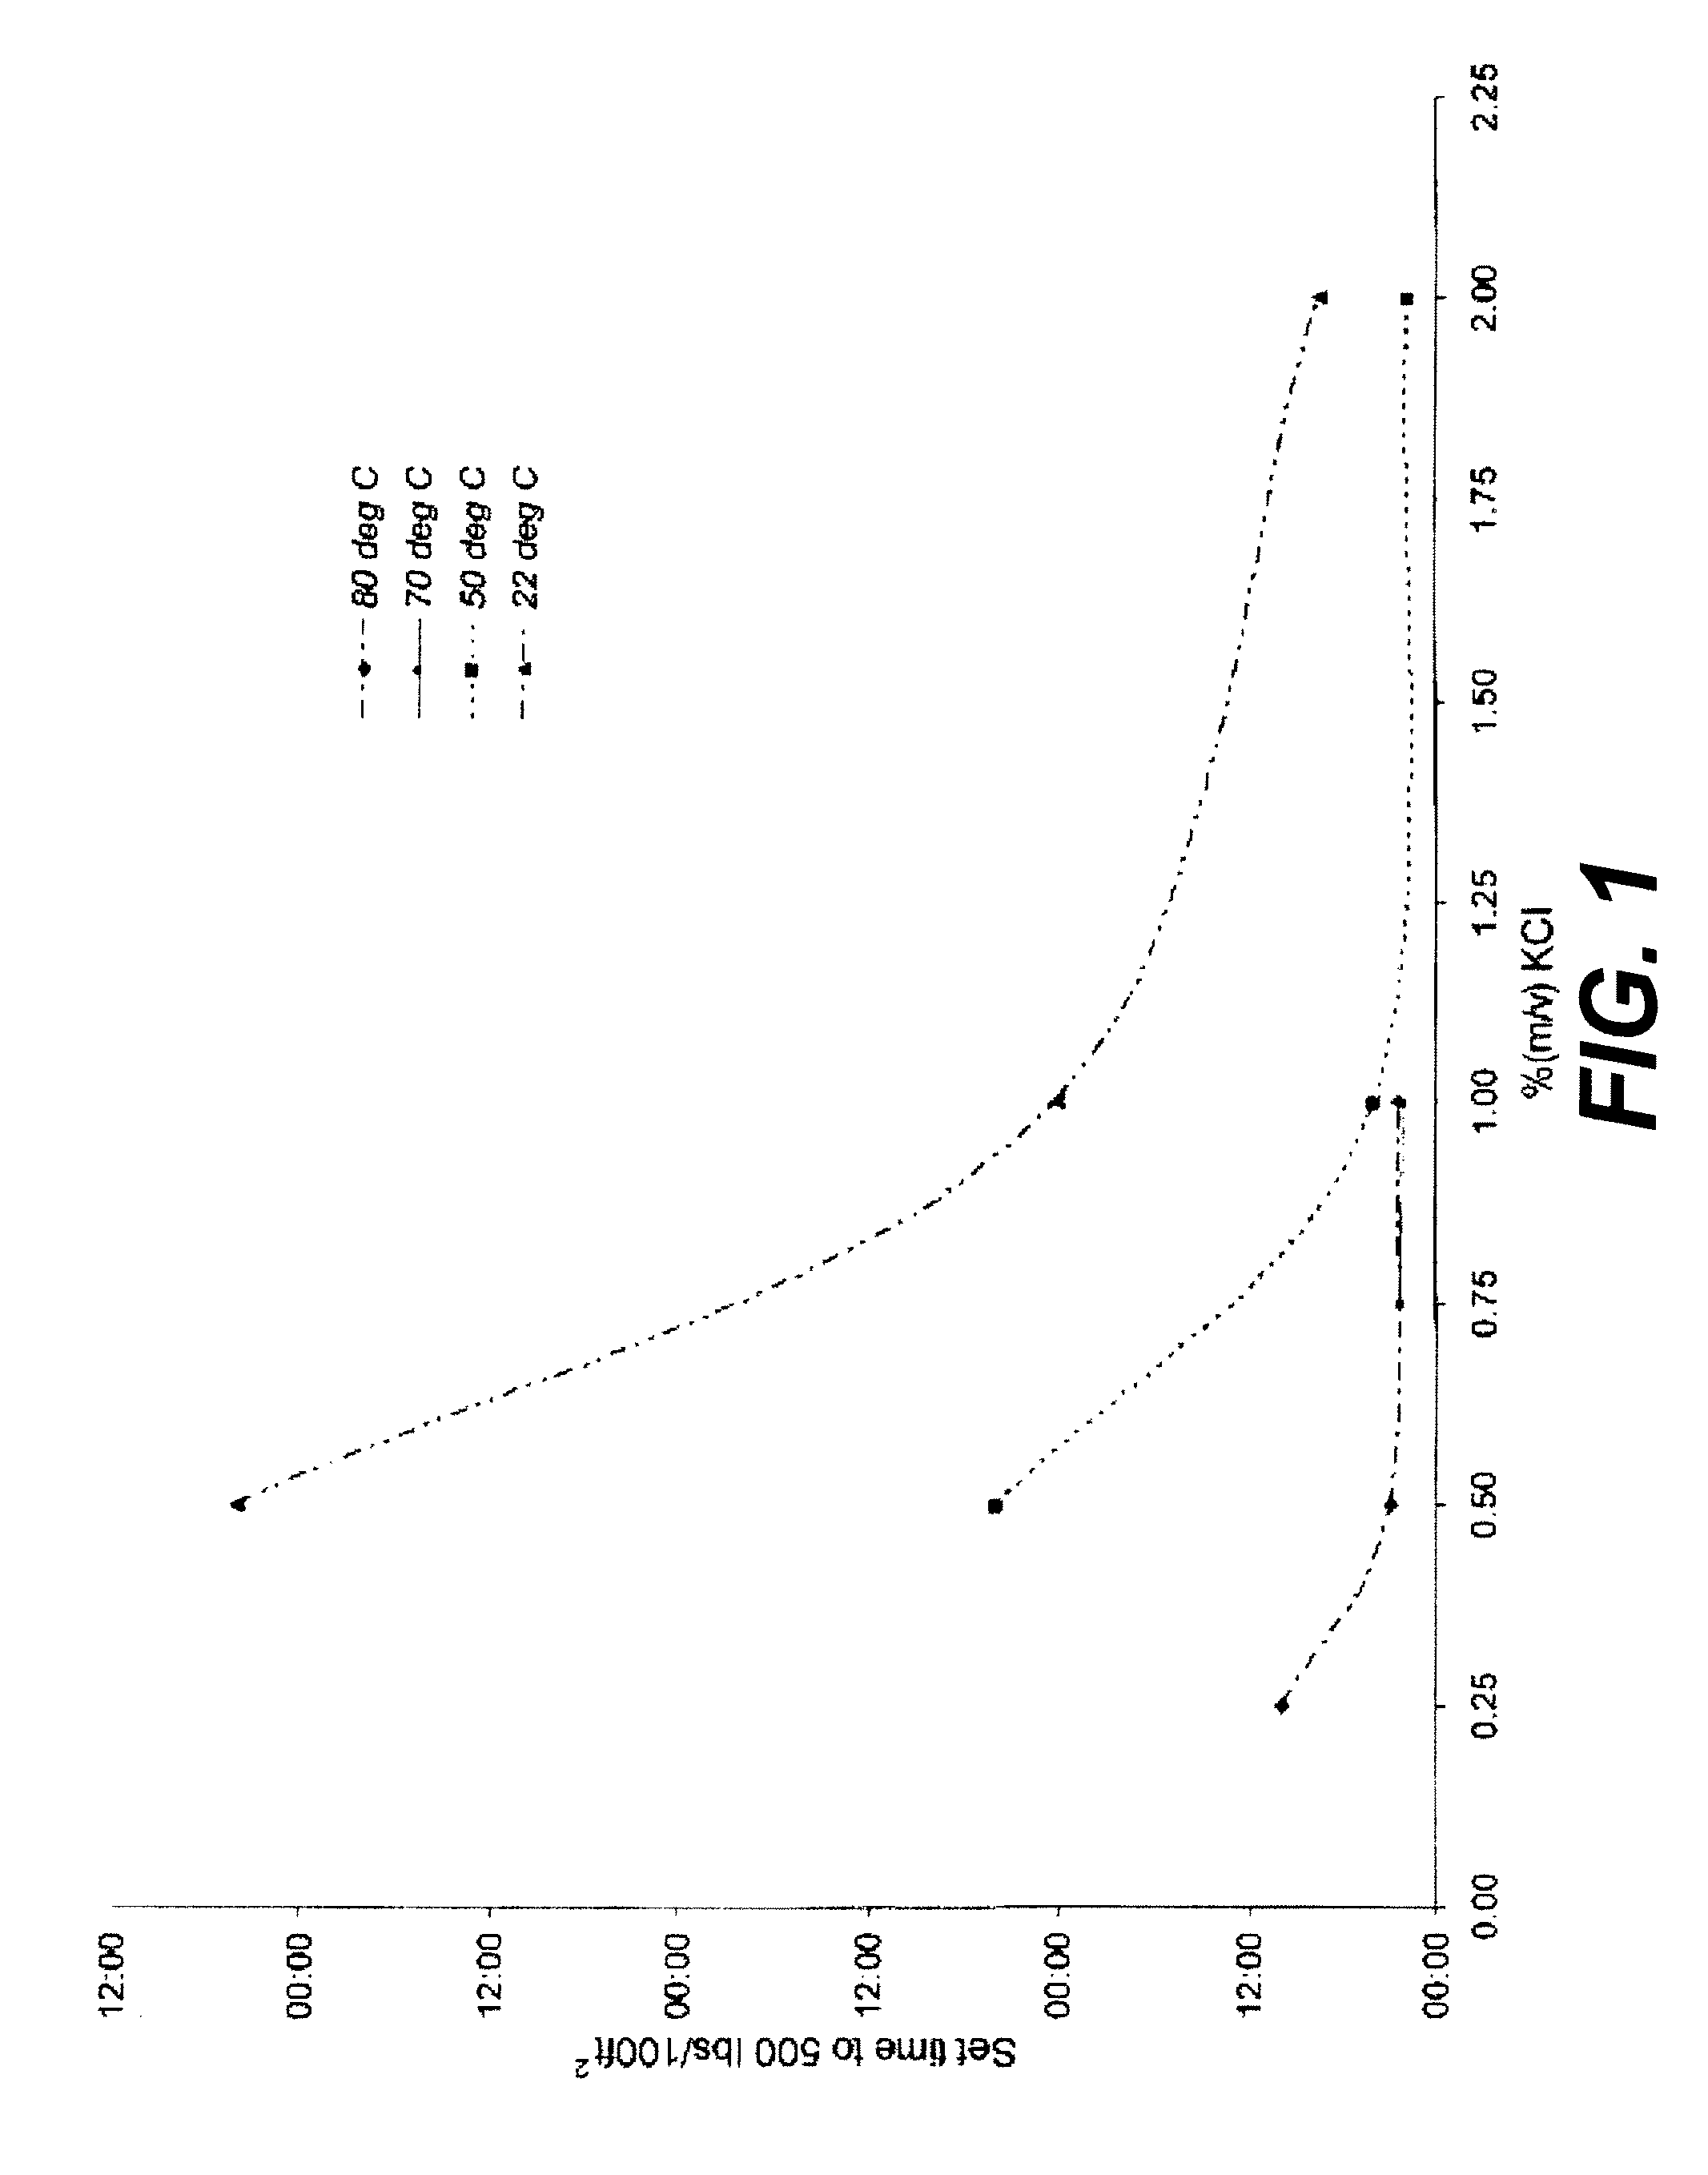 Methods of using colloidal silica based gels